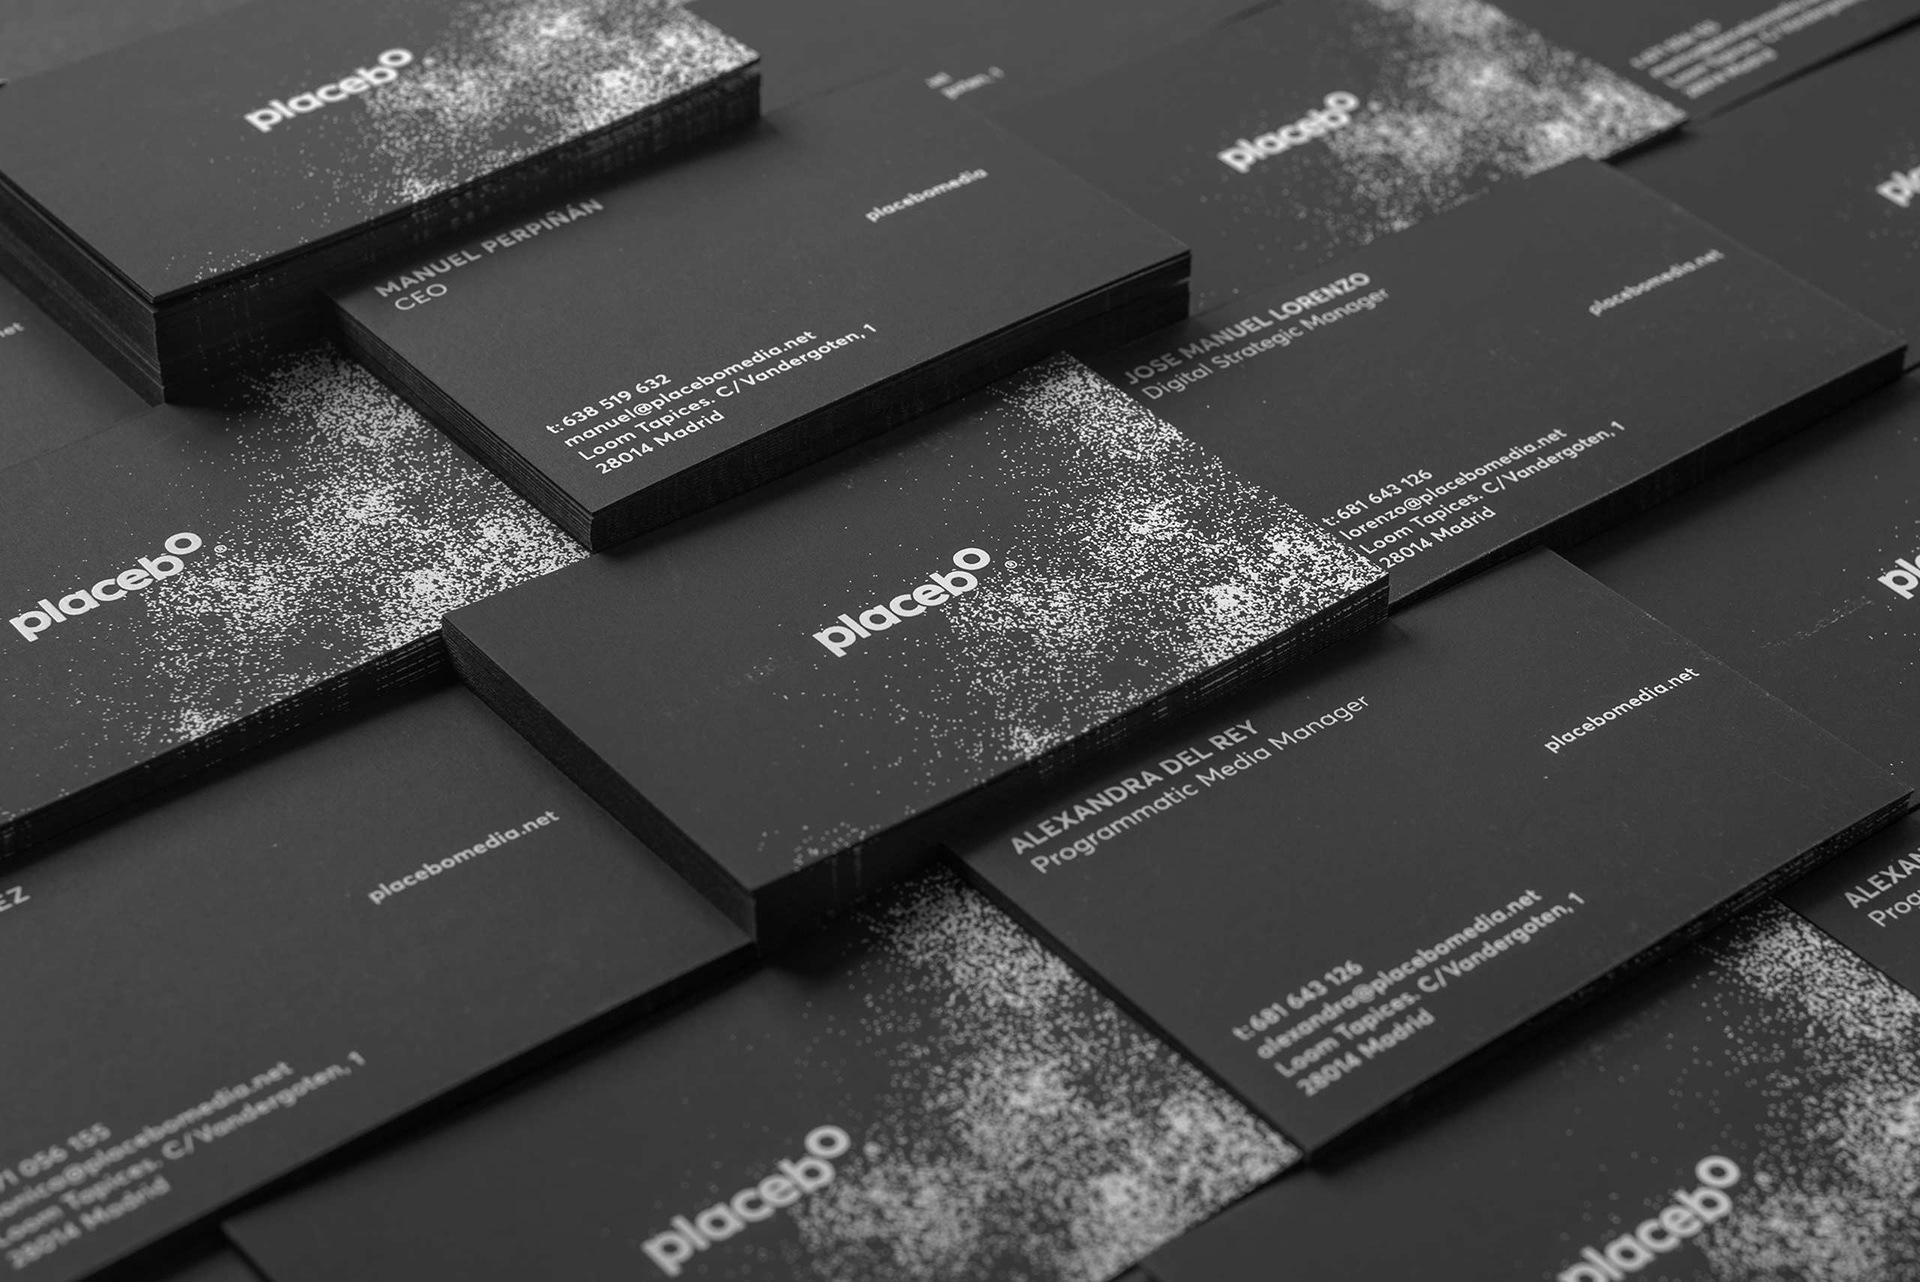 Placebo Branding and Visual Identity